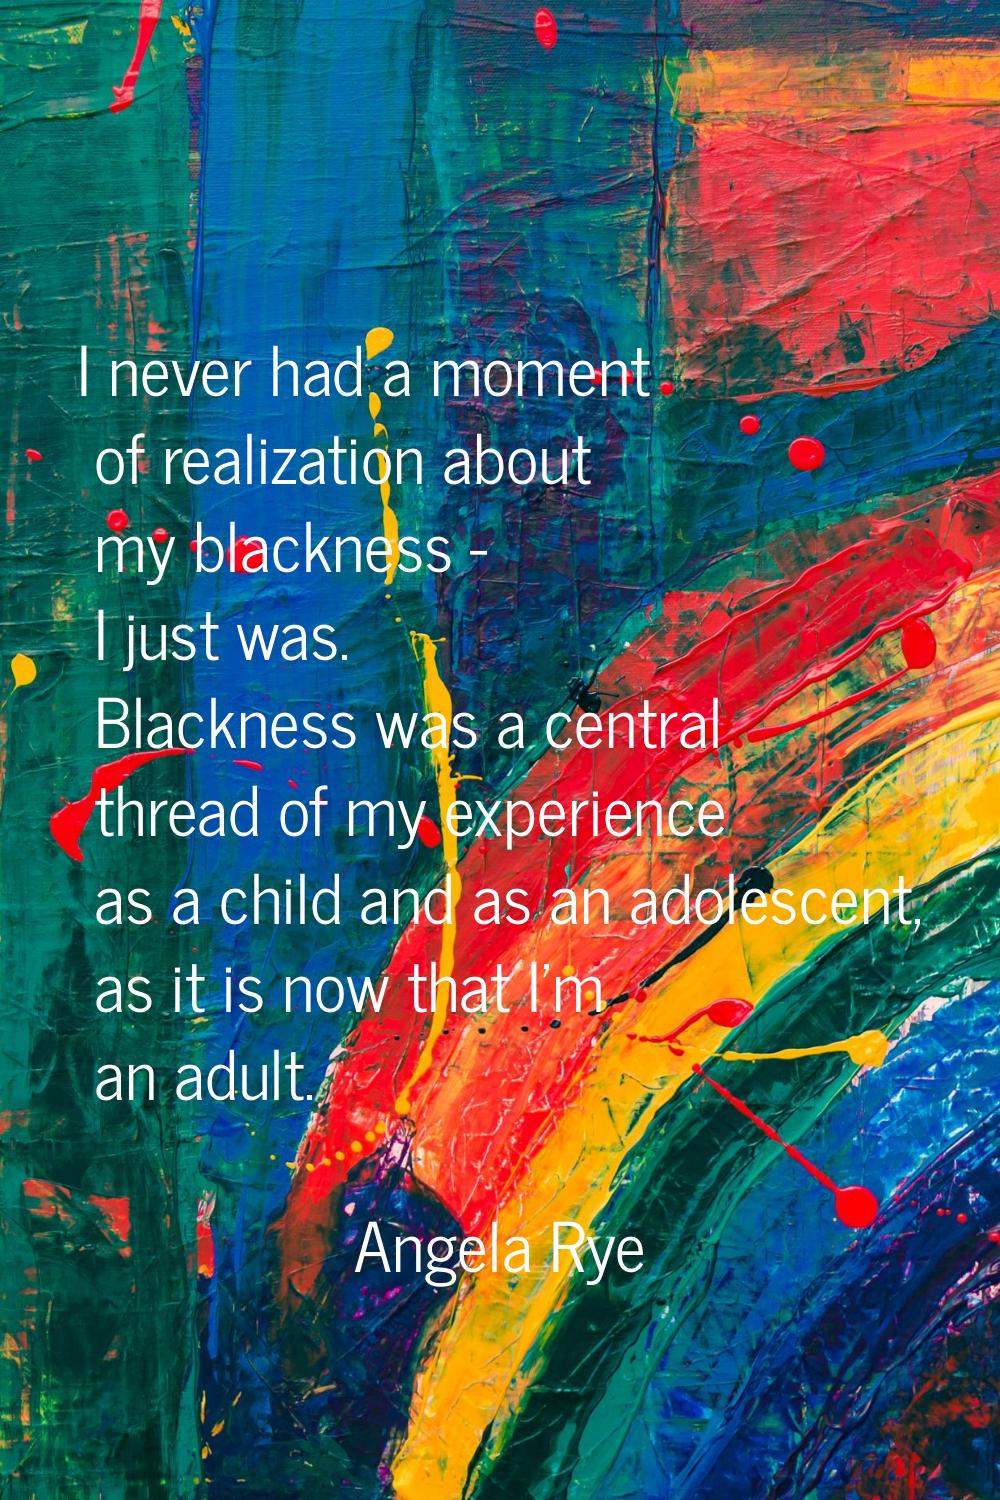 I never had a moment of realization about my blackness - I just was. Blackness was a central thread